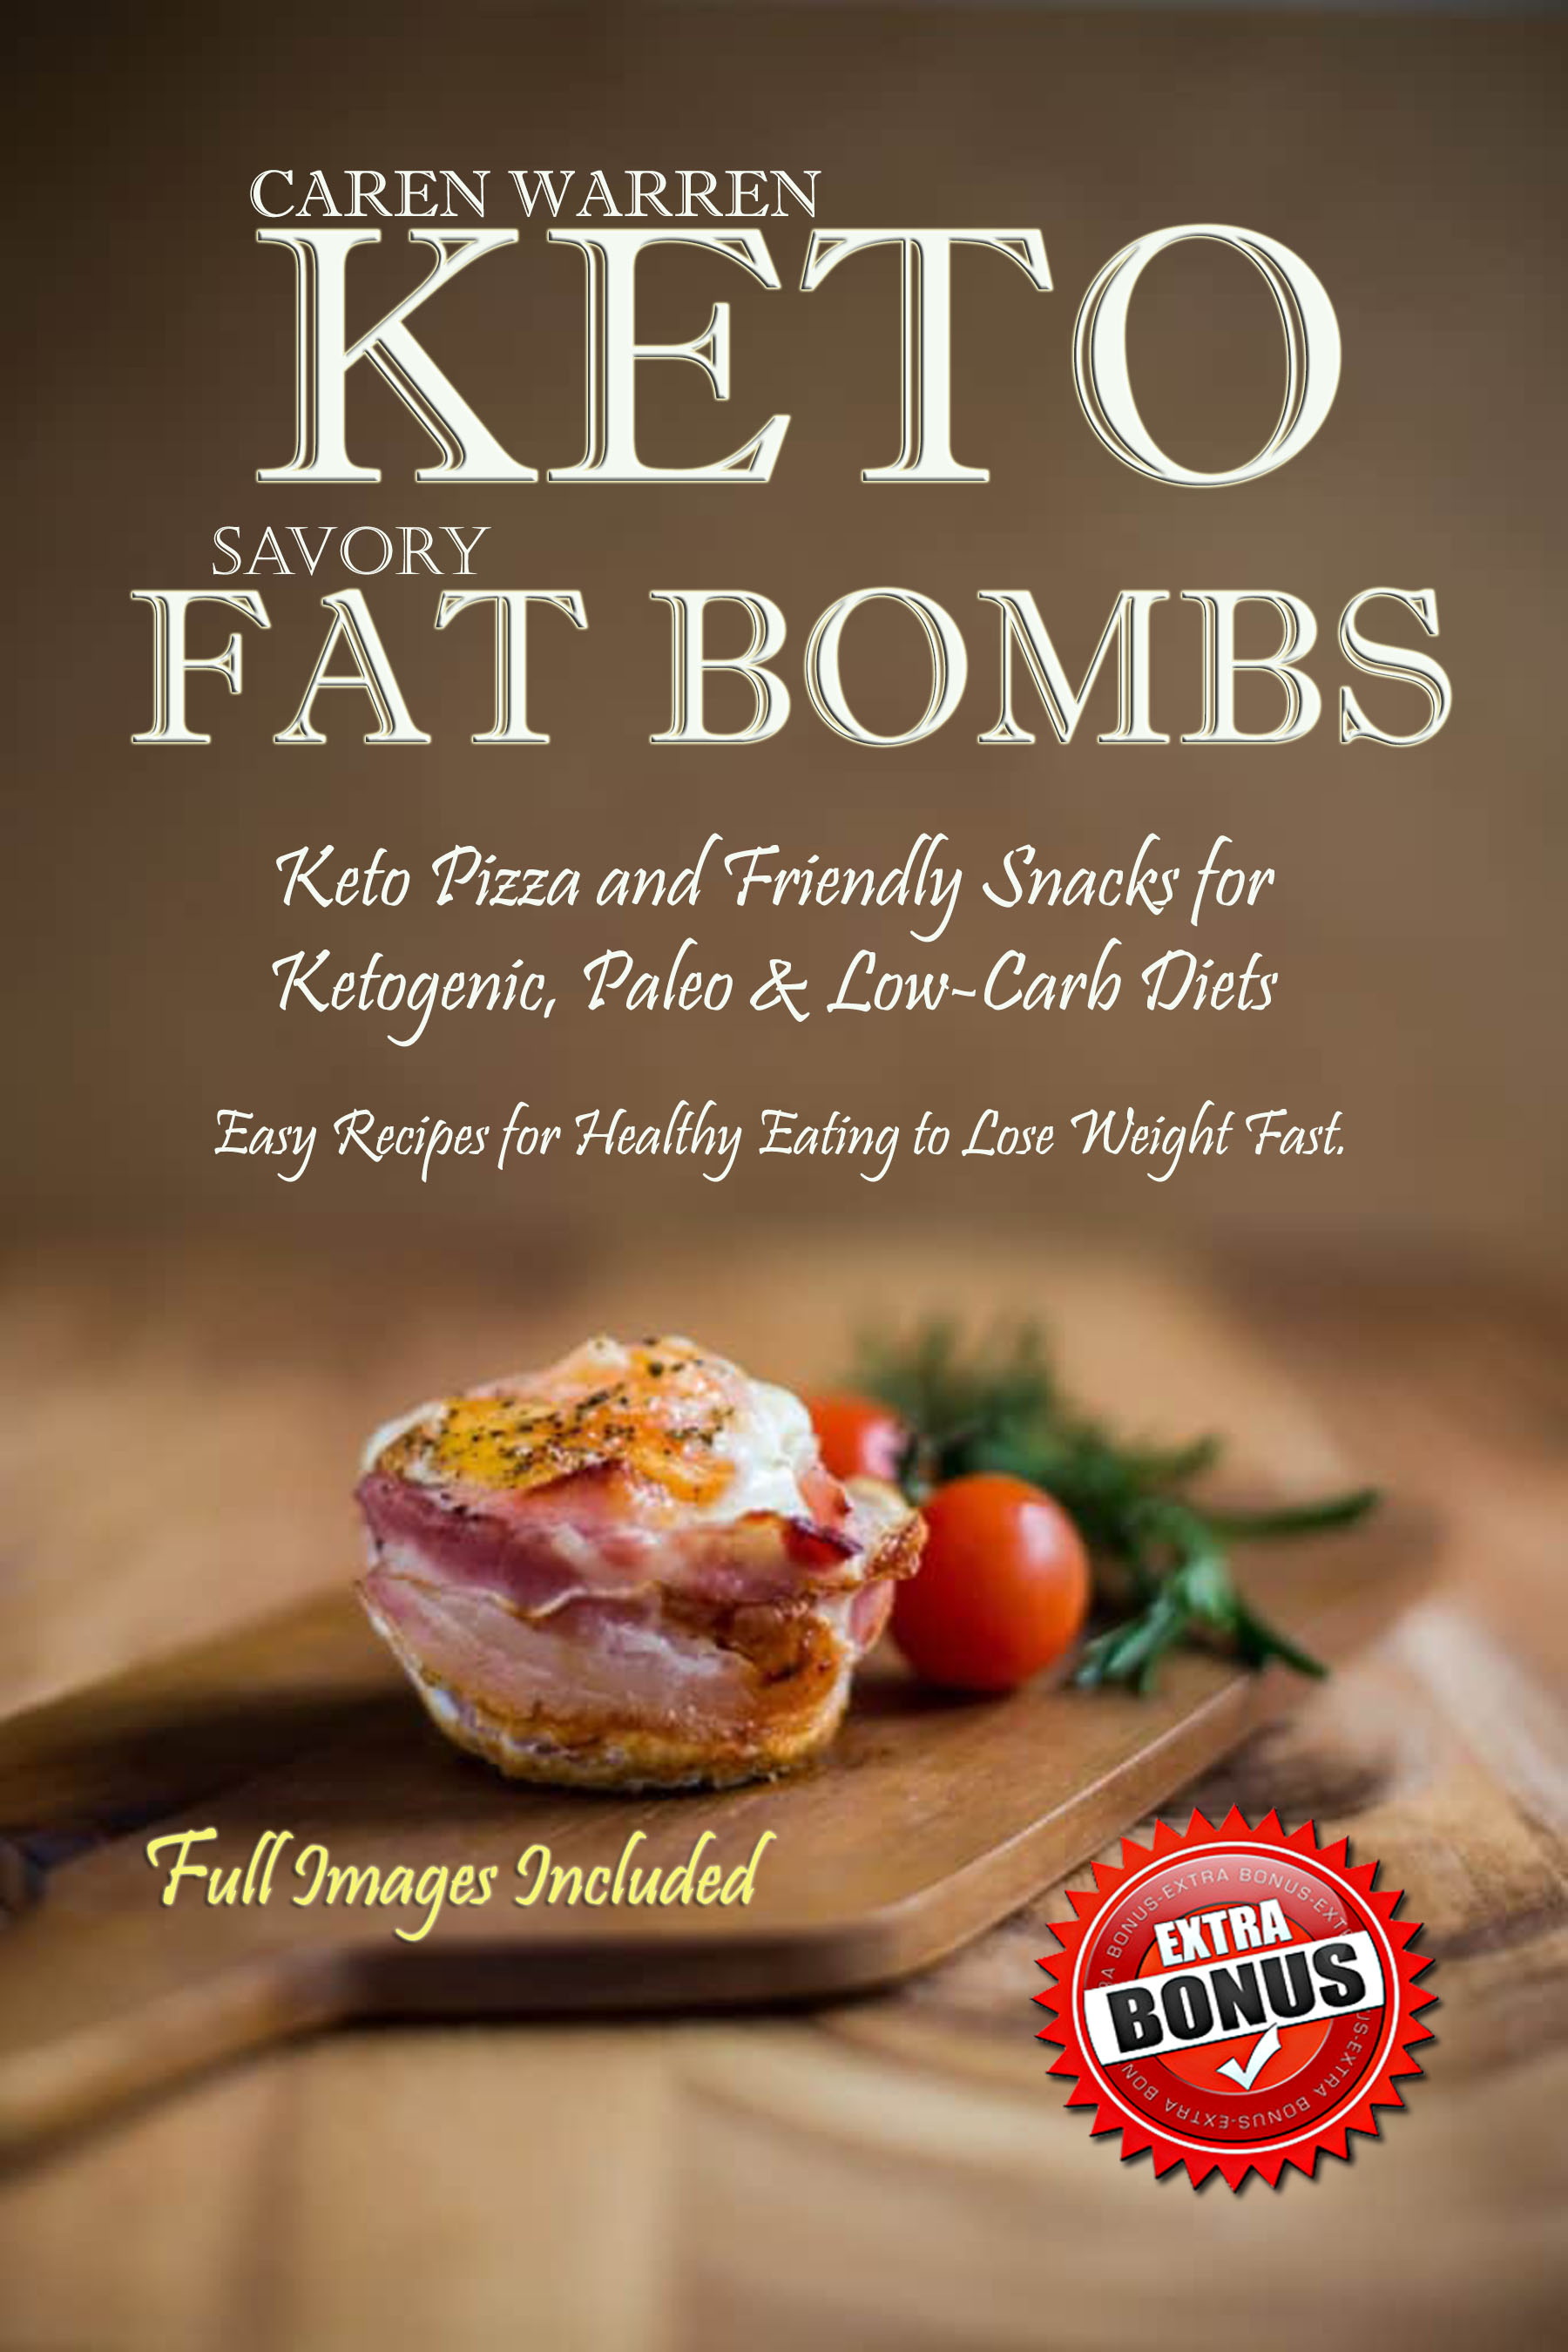 FREE: Keto Savory Fat Bombs: Keto Pizza and Friendly Snacks for Ketogenic, Paleo & Low-Carb Diets. Easy Recipes for Healthy Eating to Lose Weight Fast. (low-carb snacks, keto fat bomb recipes) by Caren Warren